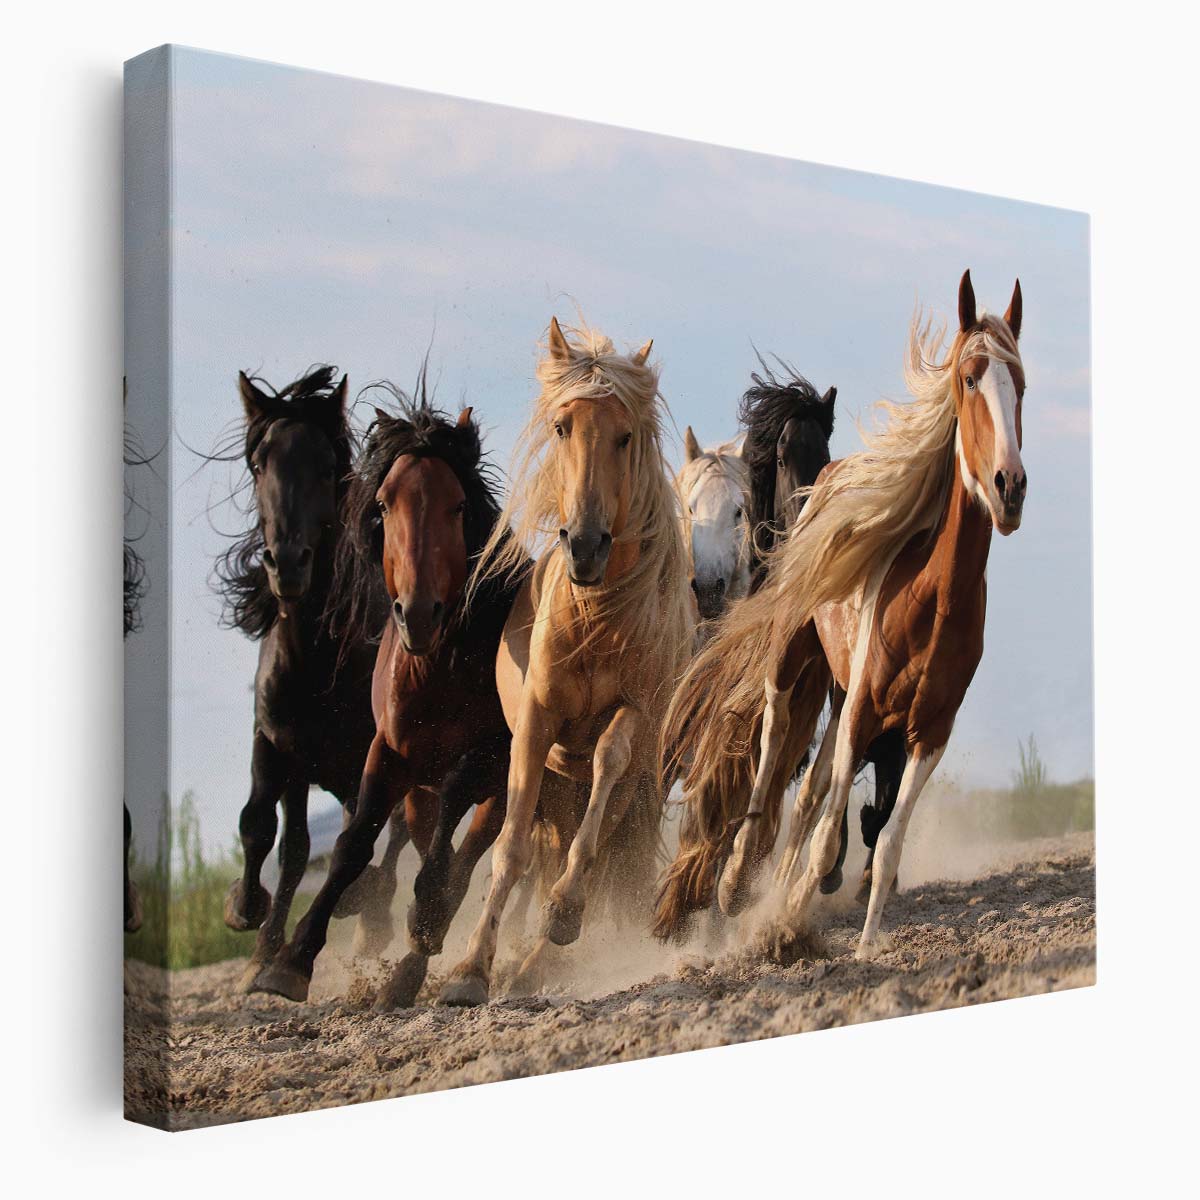 Dramatic Galloping Horses in Action - Mongolian Summer Wall Art